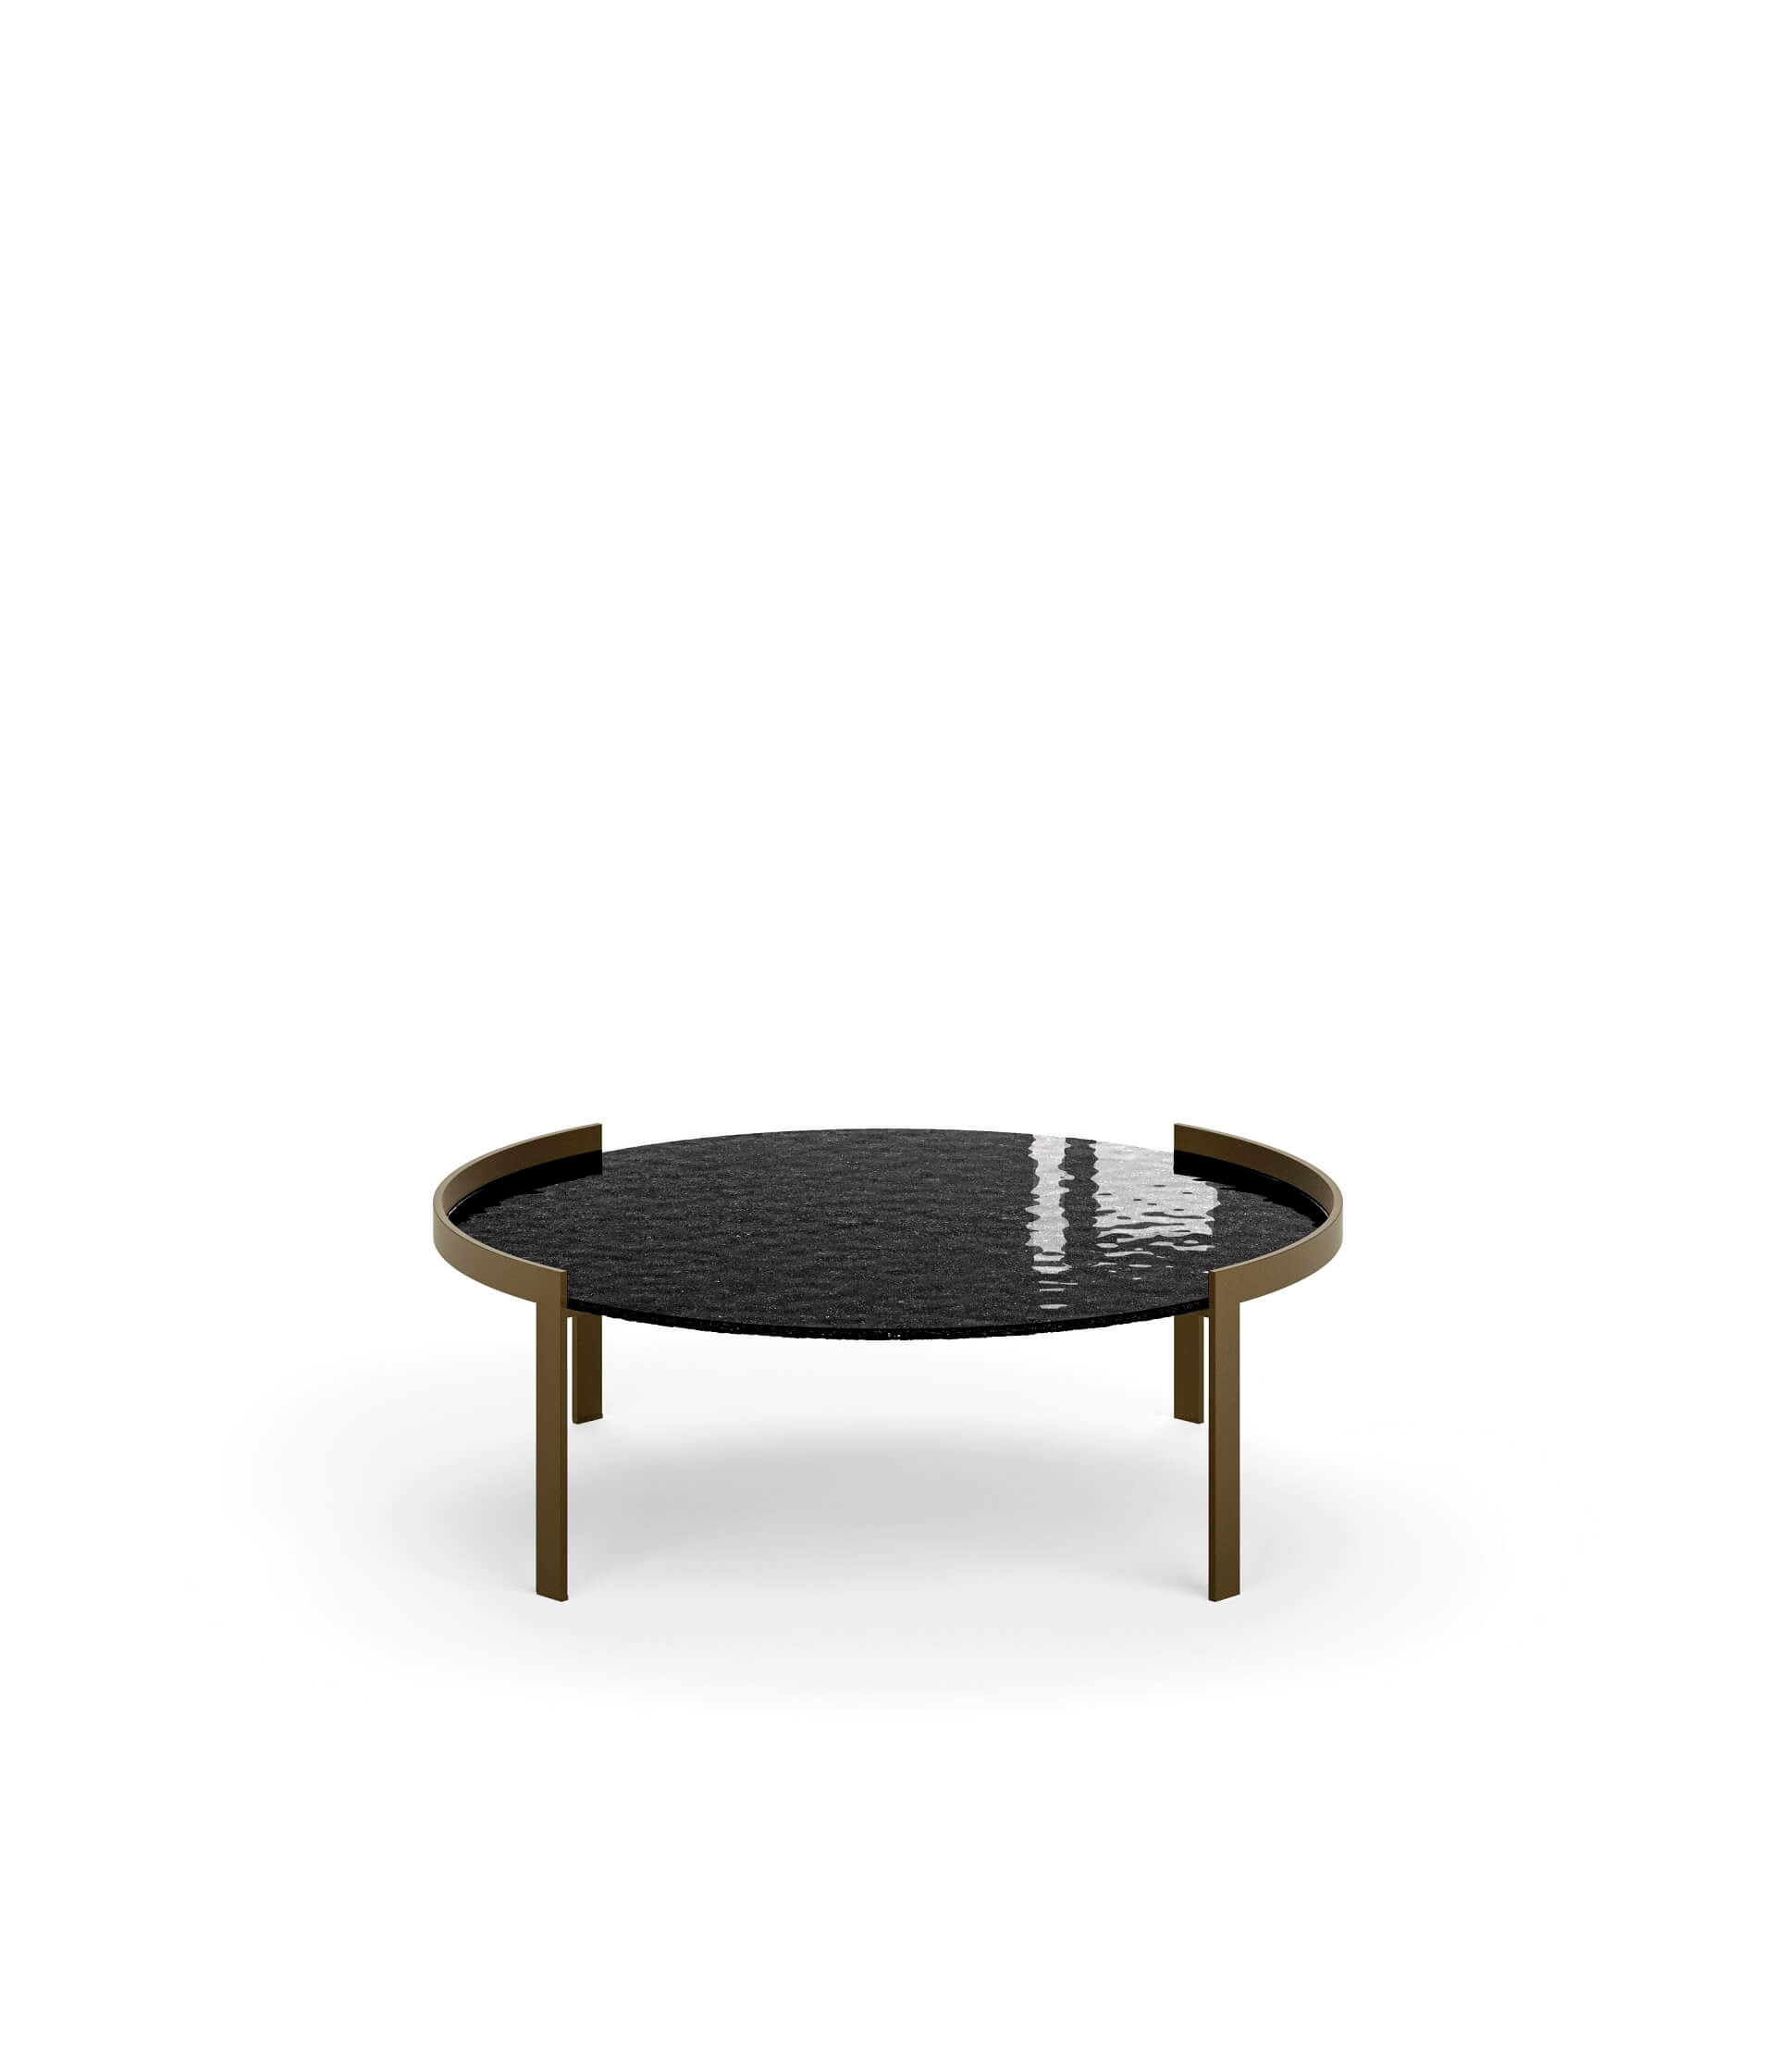 Eforma_Perry coffee table